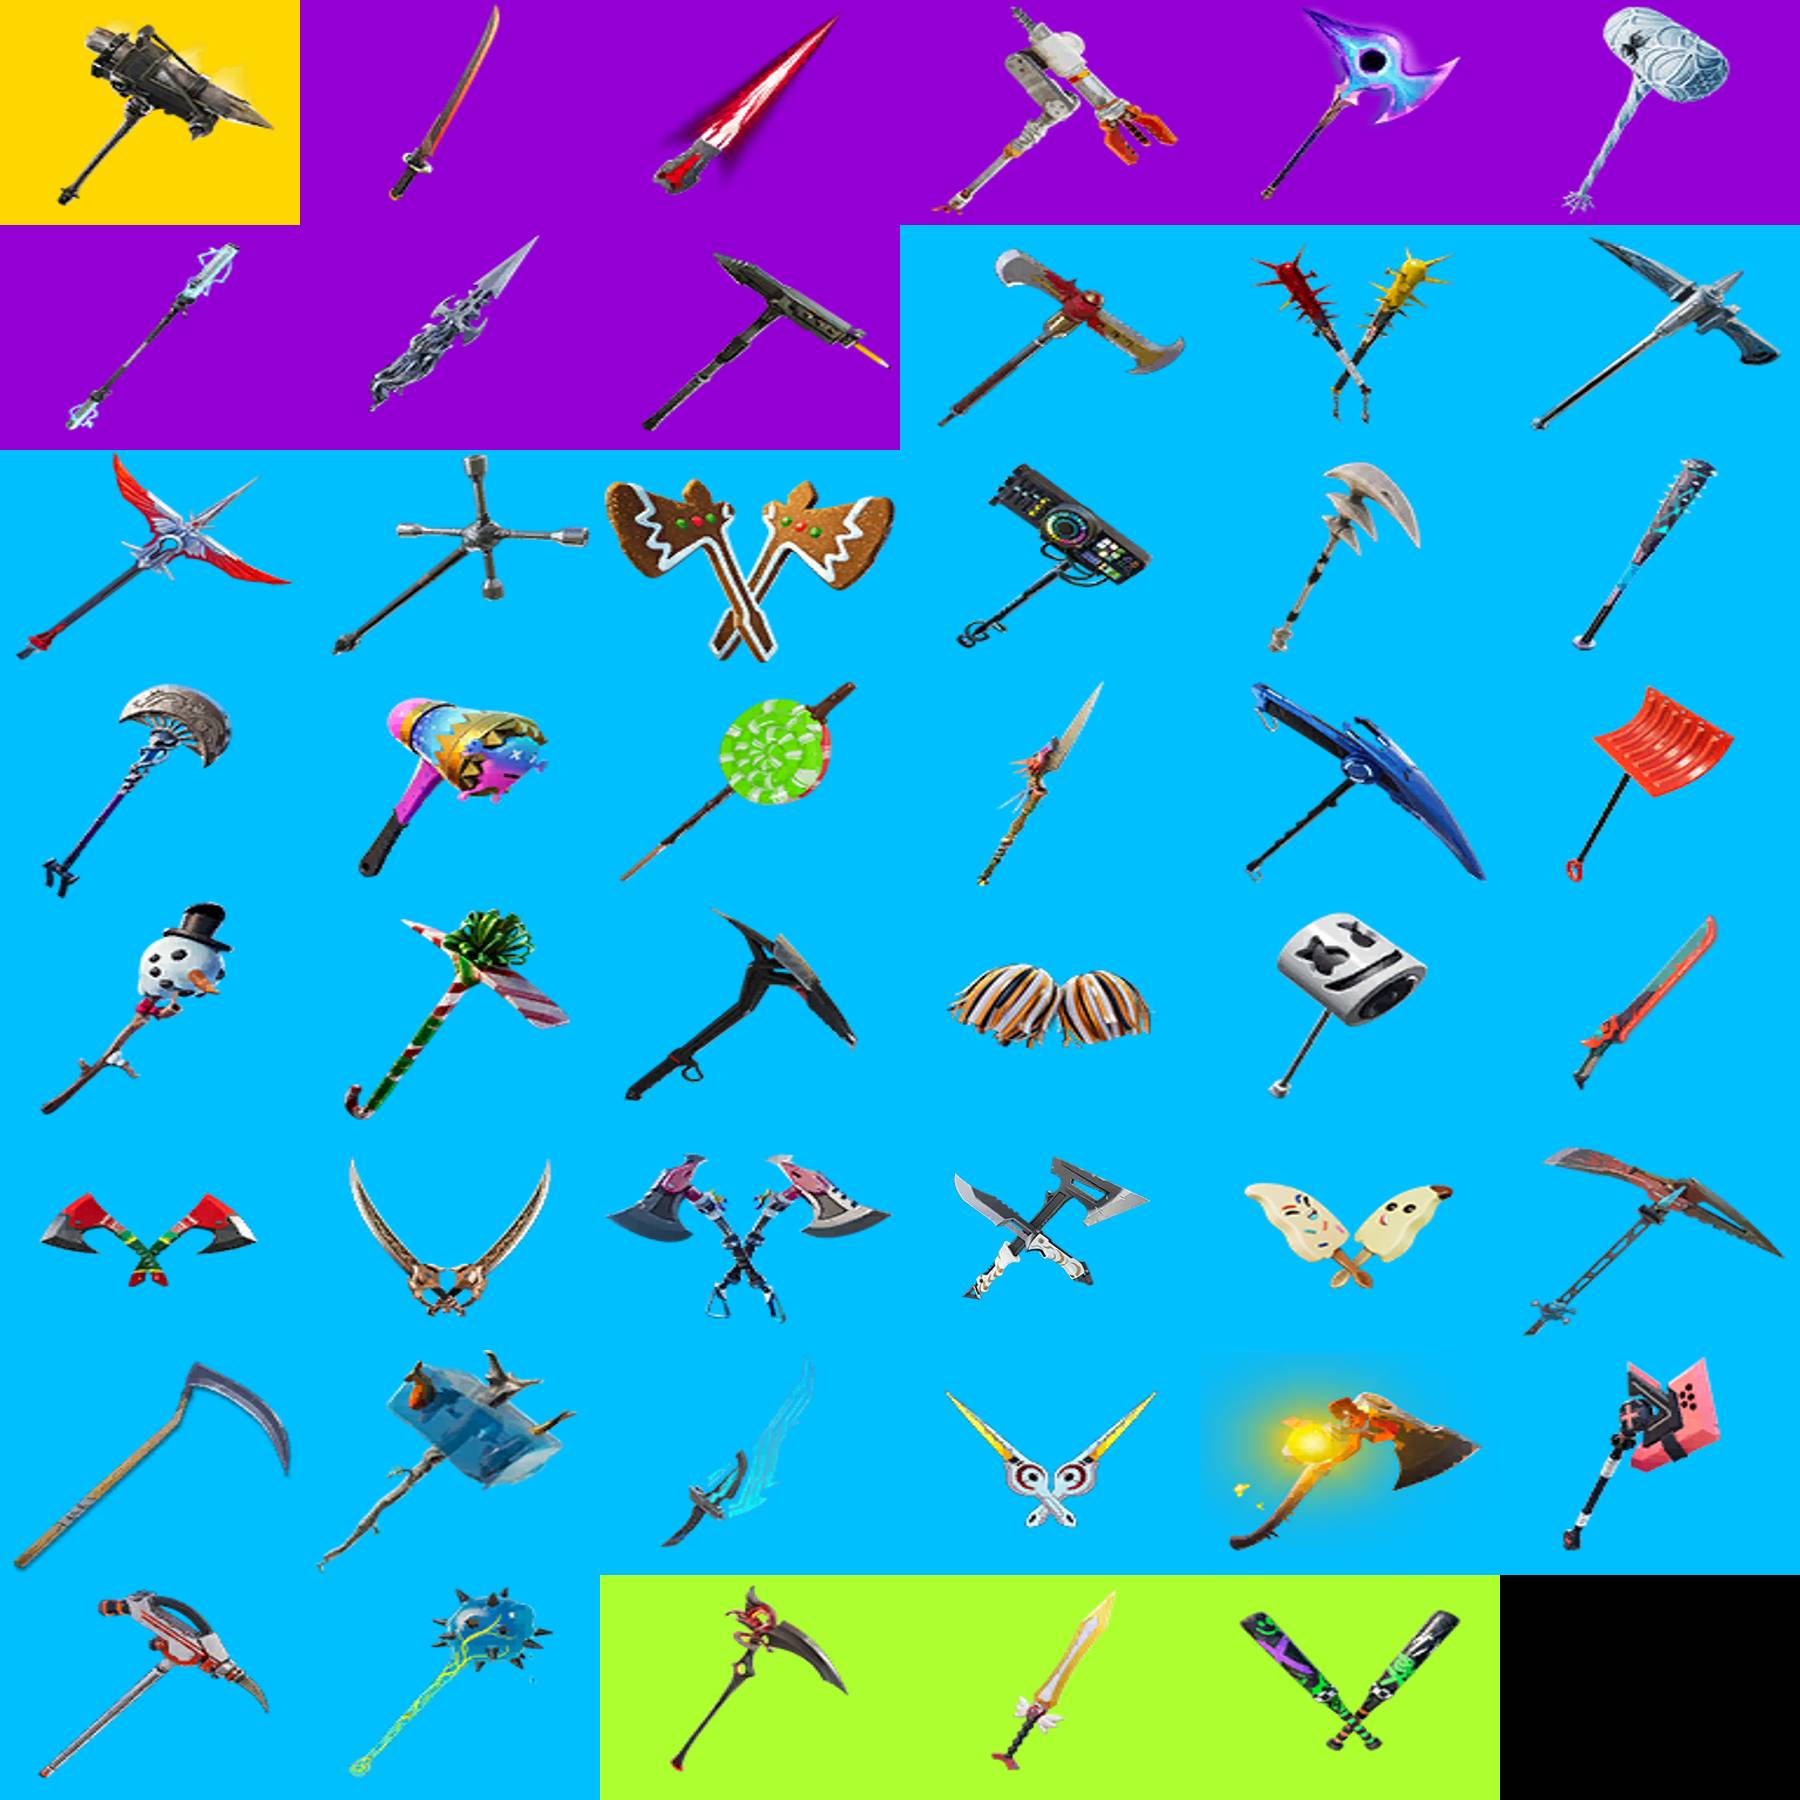 Online game inventory color icons set. Esports, cybersports. Battle royale.  Computer, video game equipment. Soldier,…